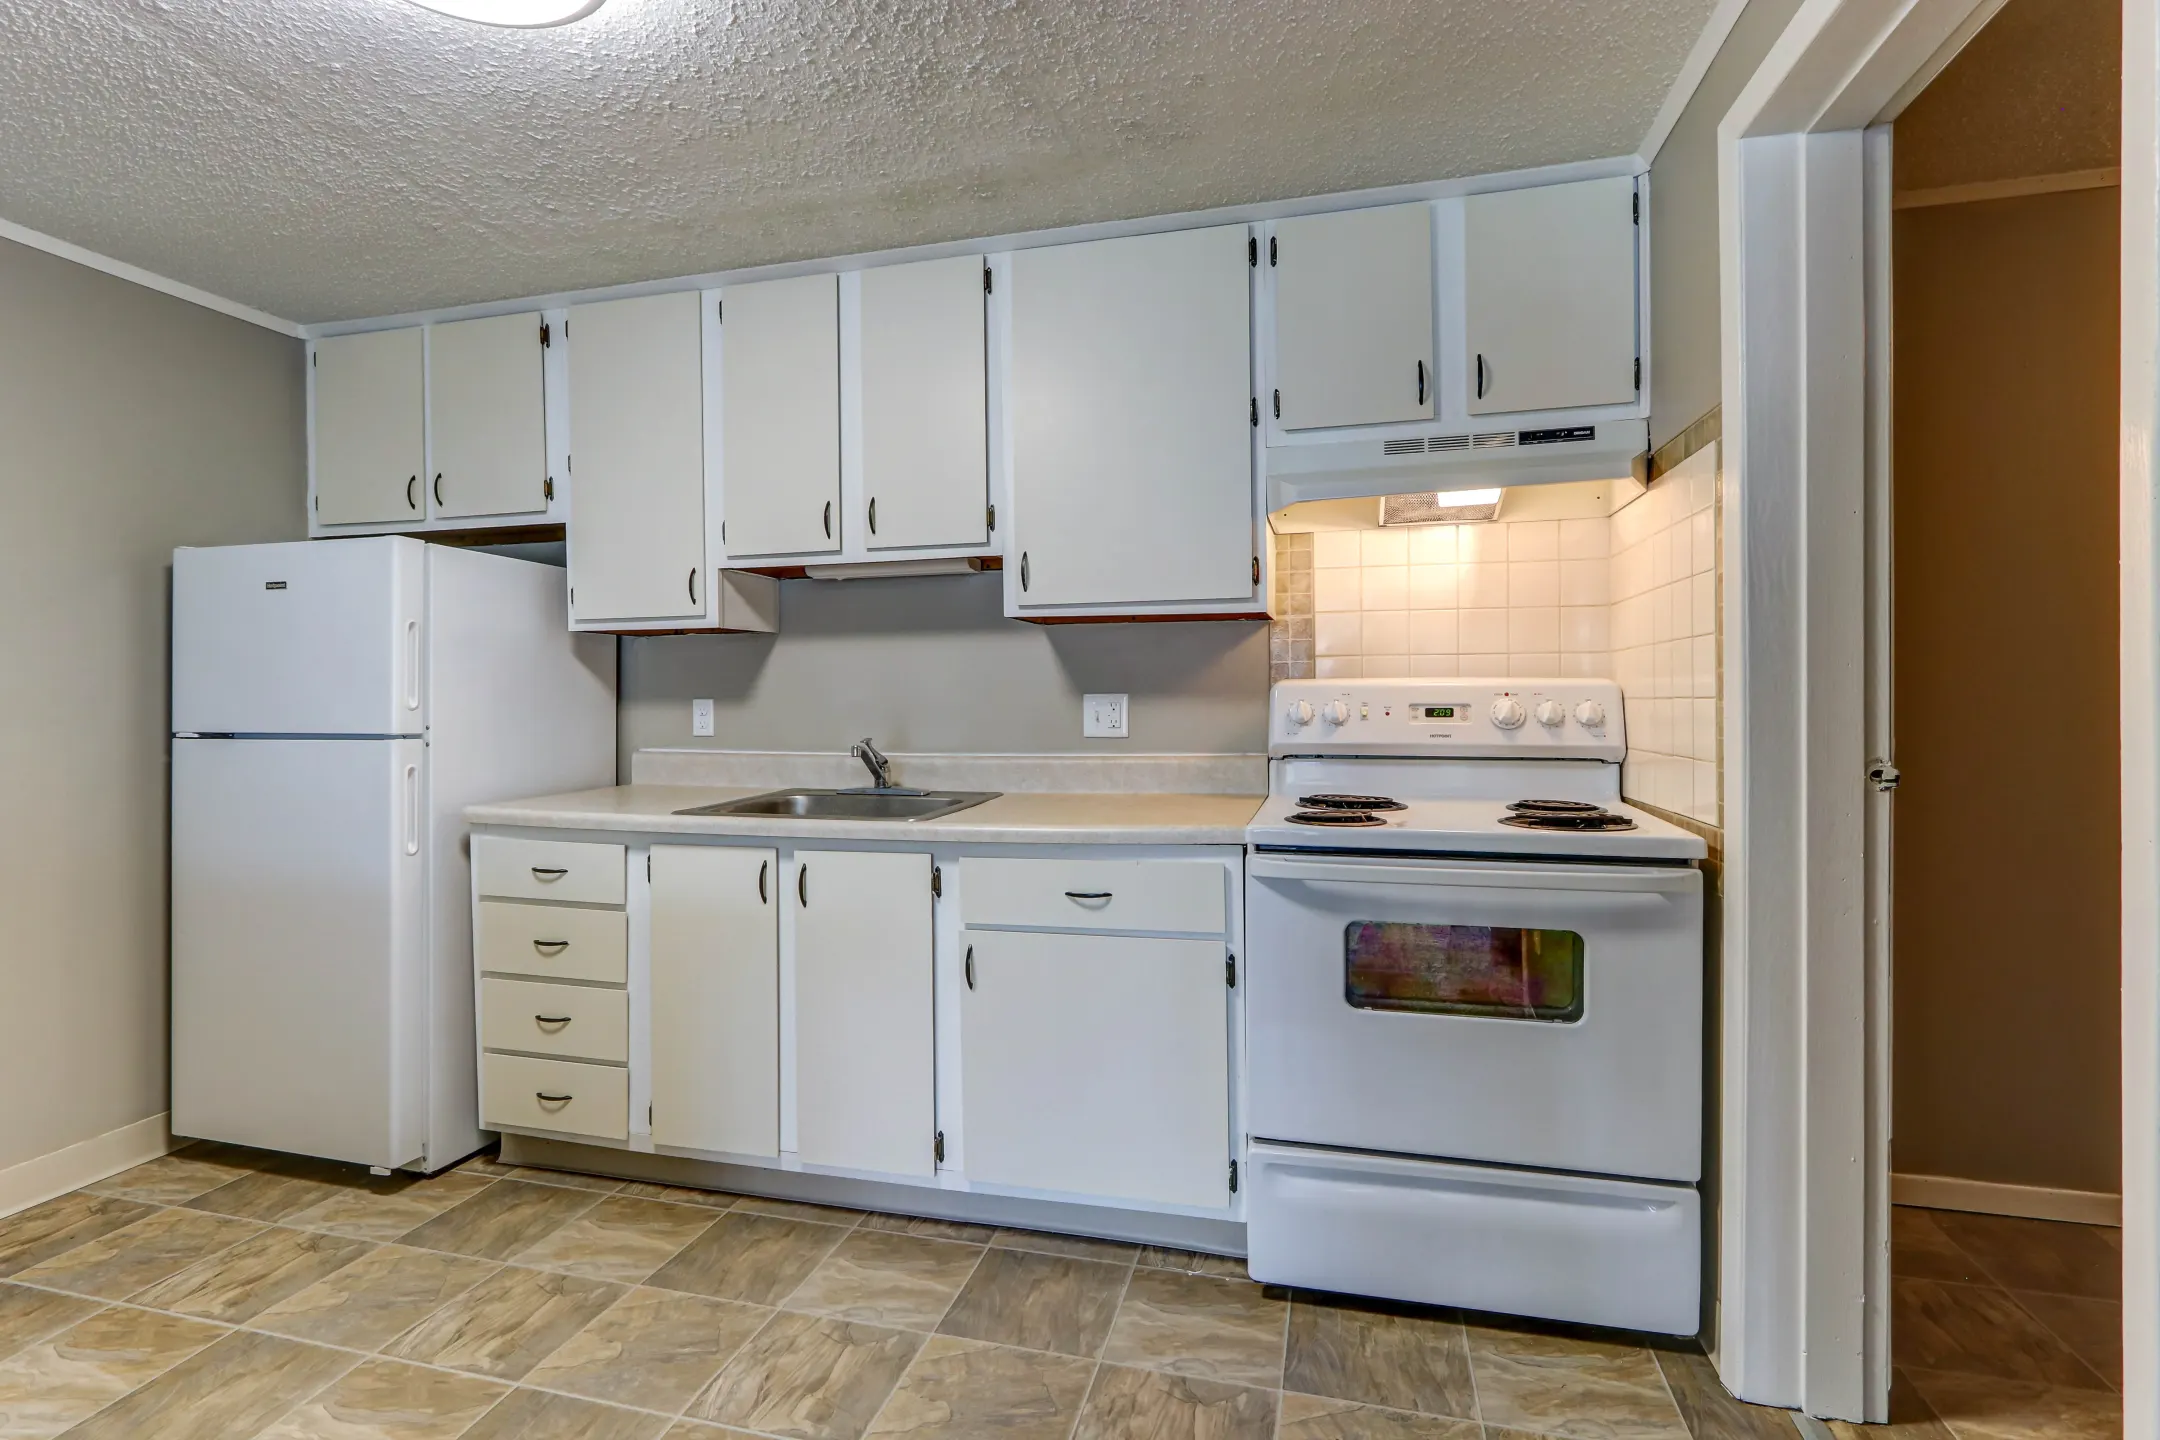 Kitchen - Carriage Hill Apartments - Medina, OH